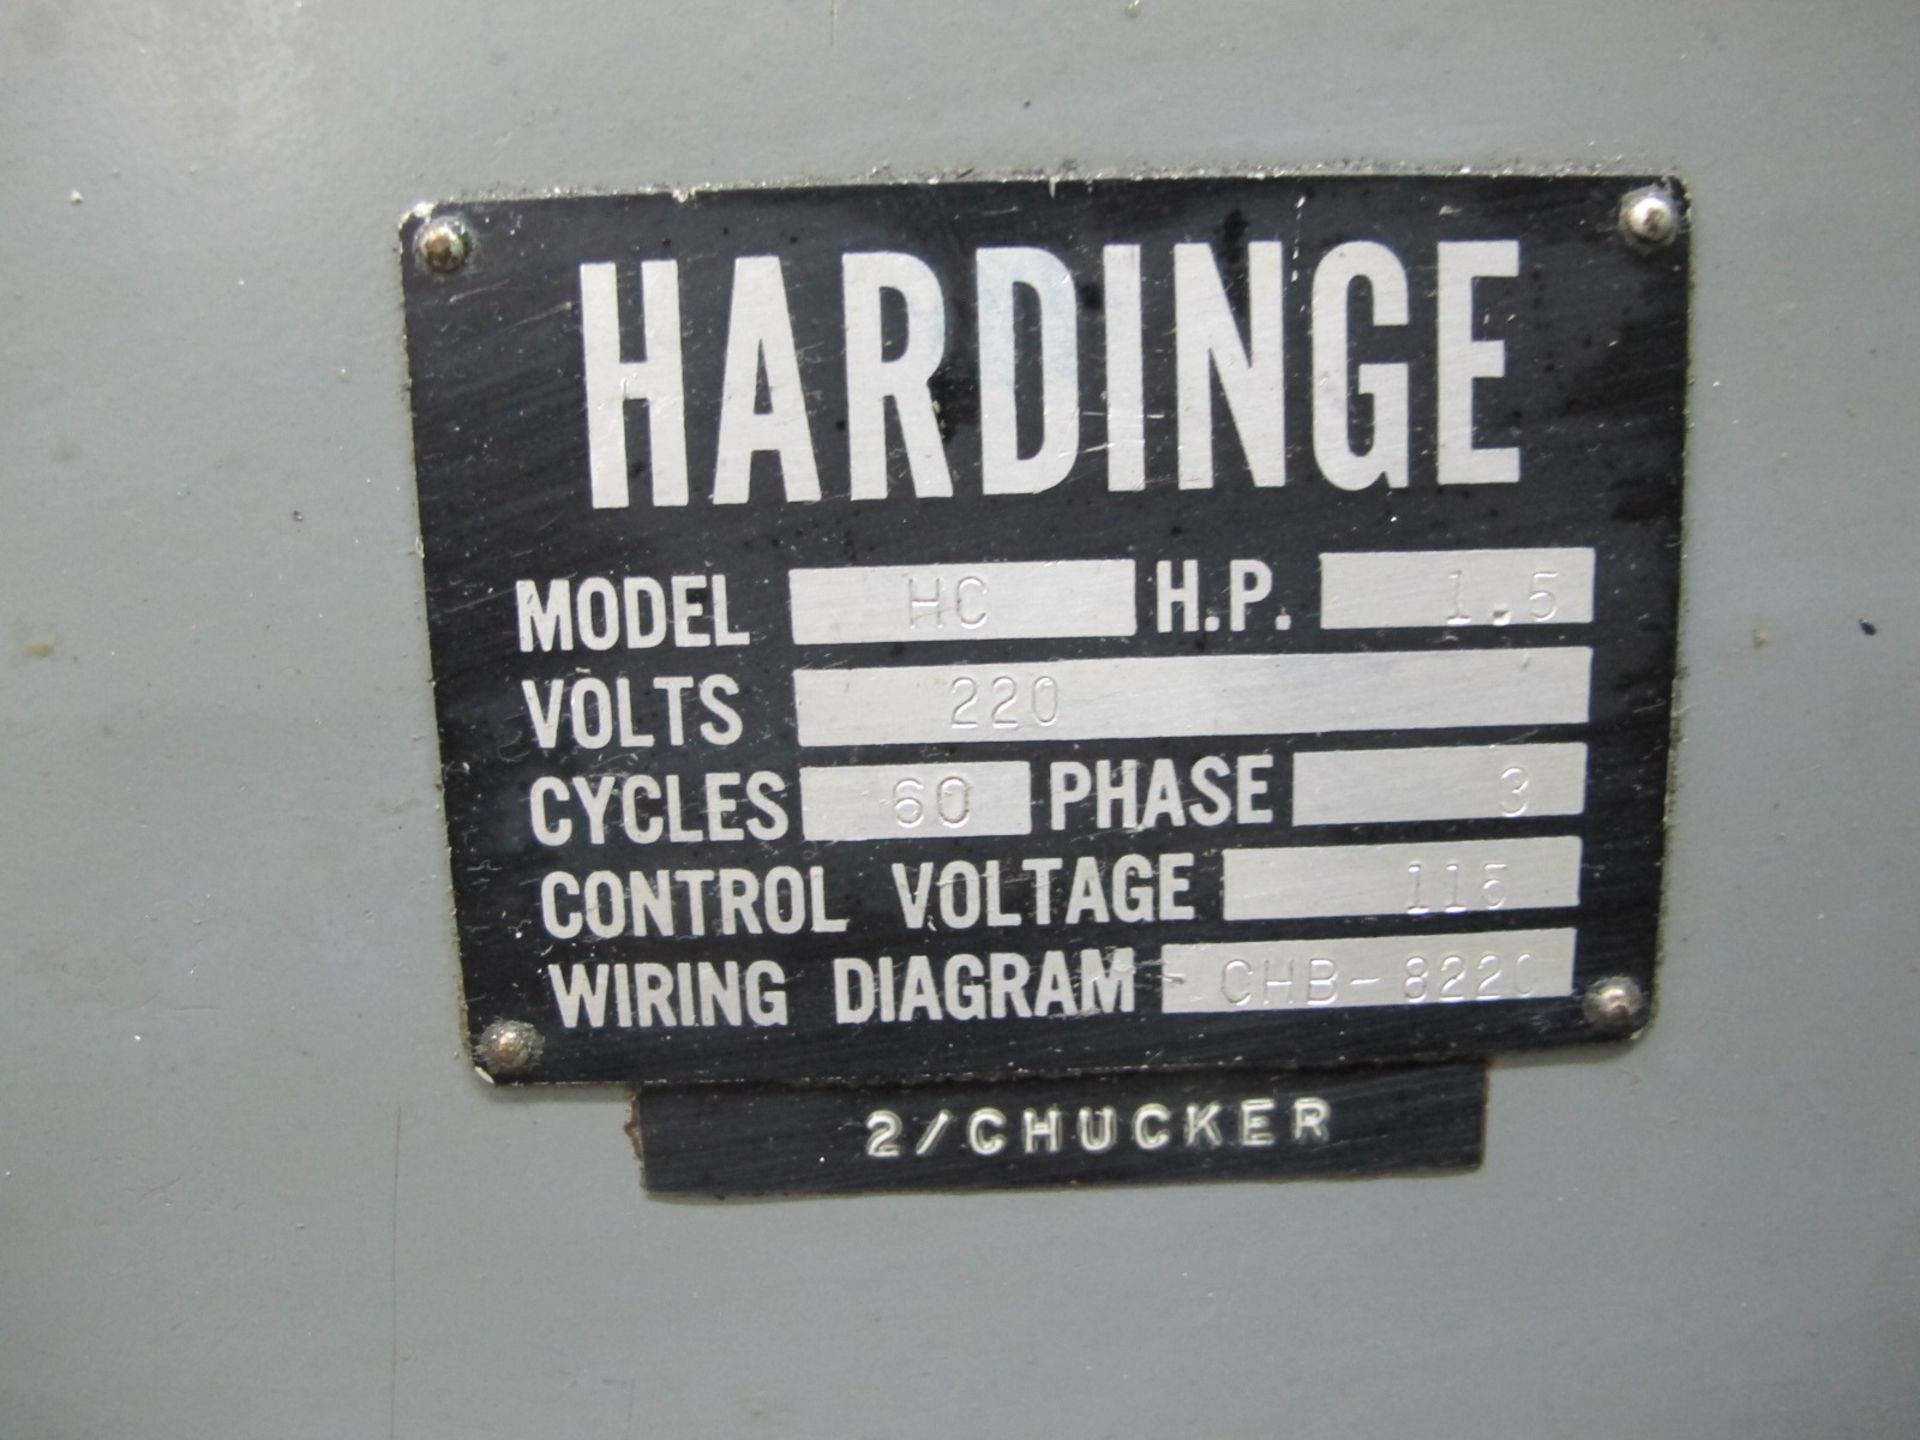 Hardinge mdl. HC Hand Chuckers w/ 125-3000 RPM, 8-Station Turret, 5C Collet Closer, Power Feeds - Image 4 of 4